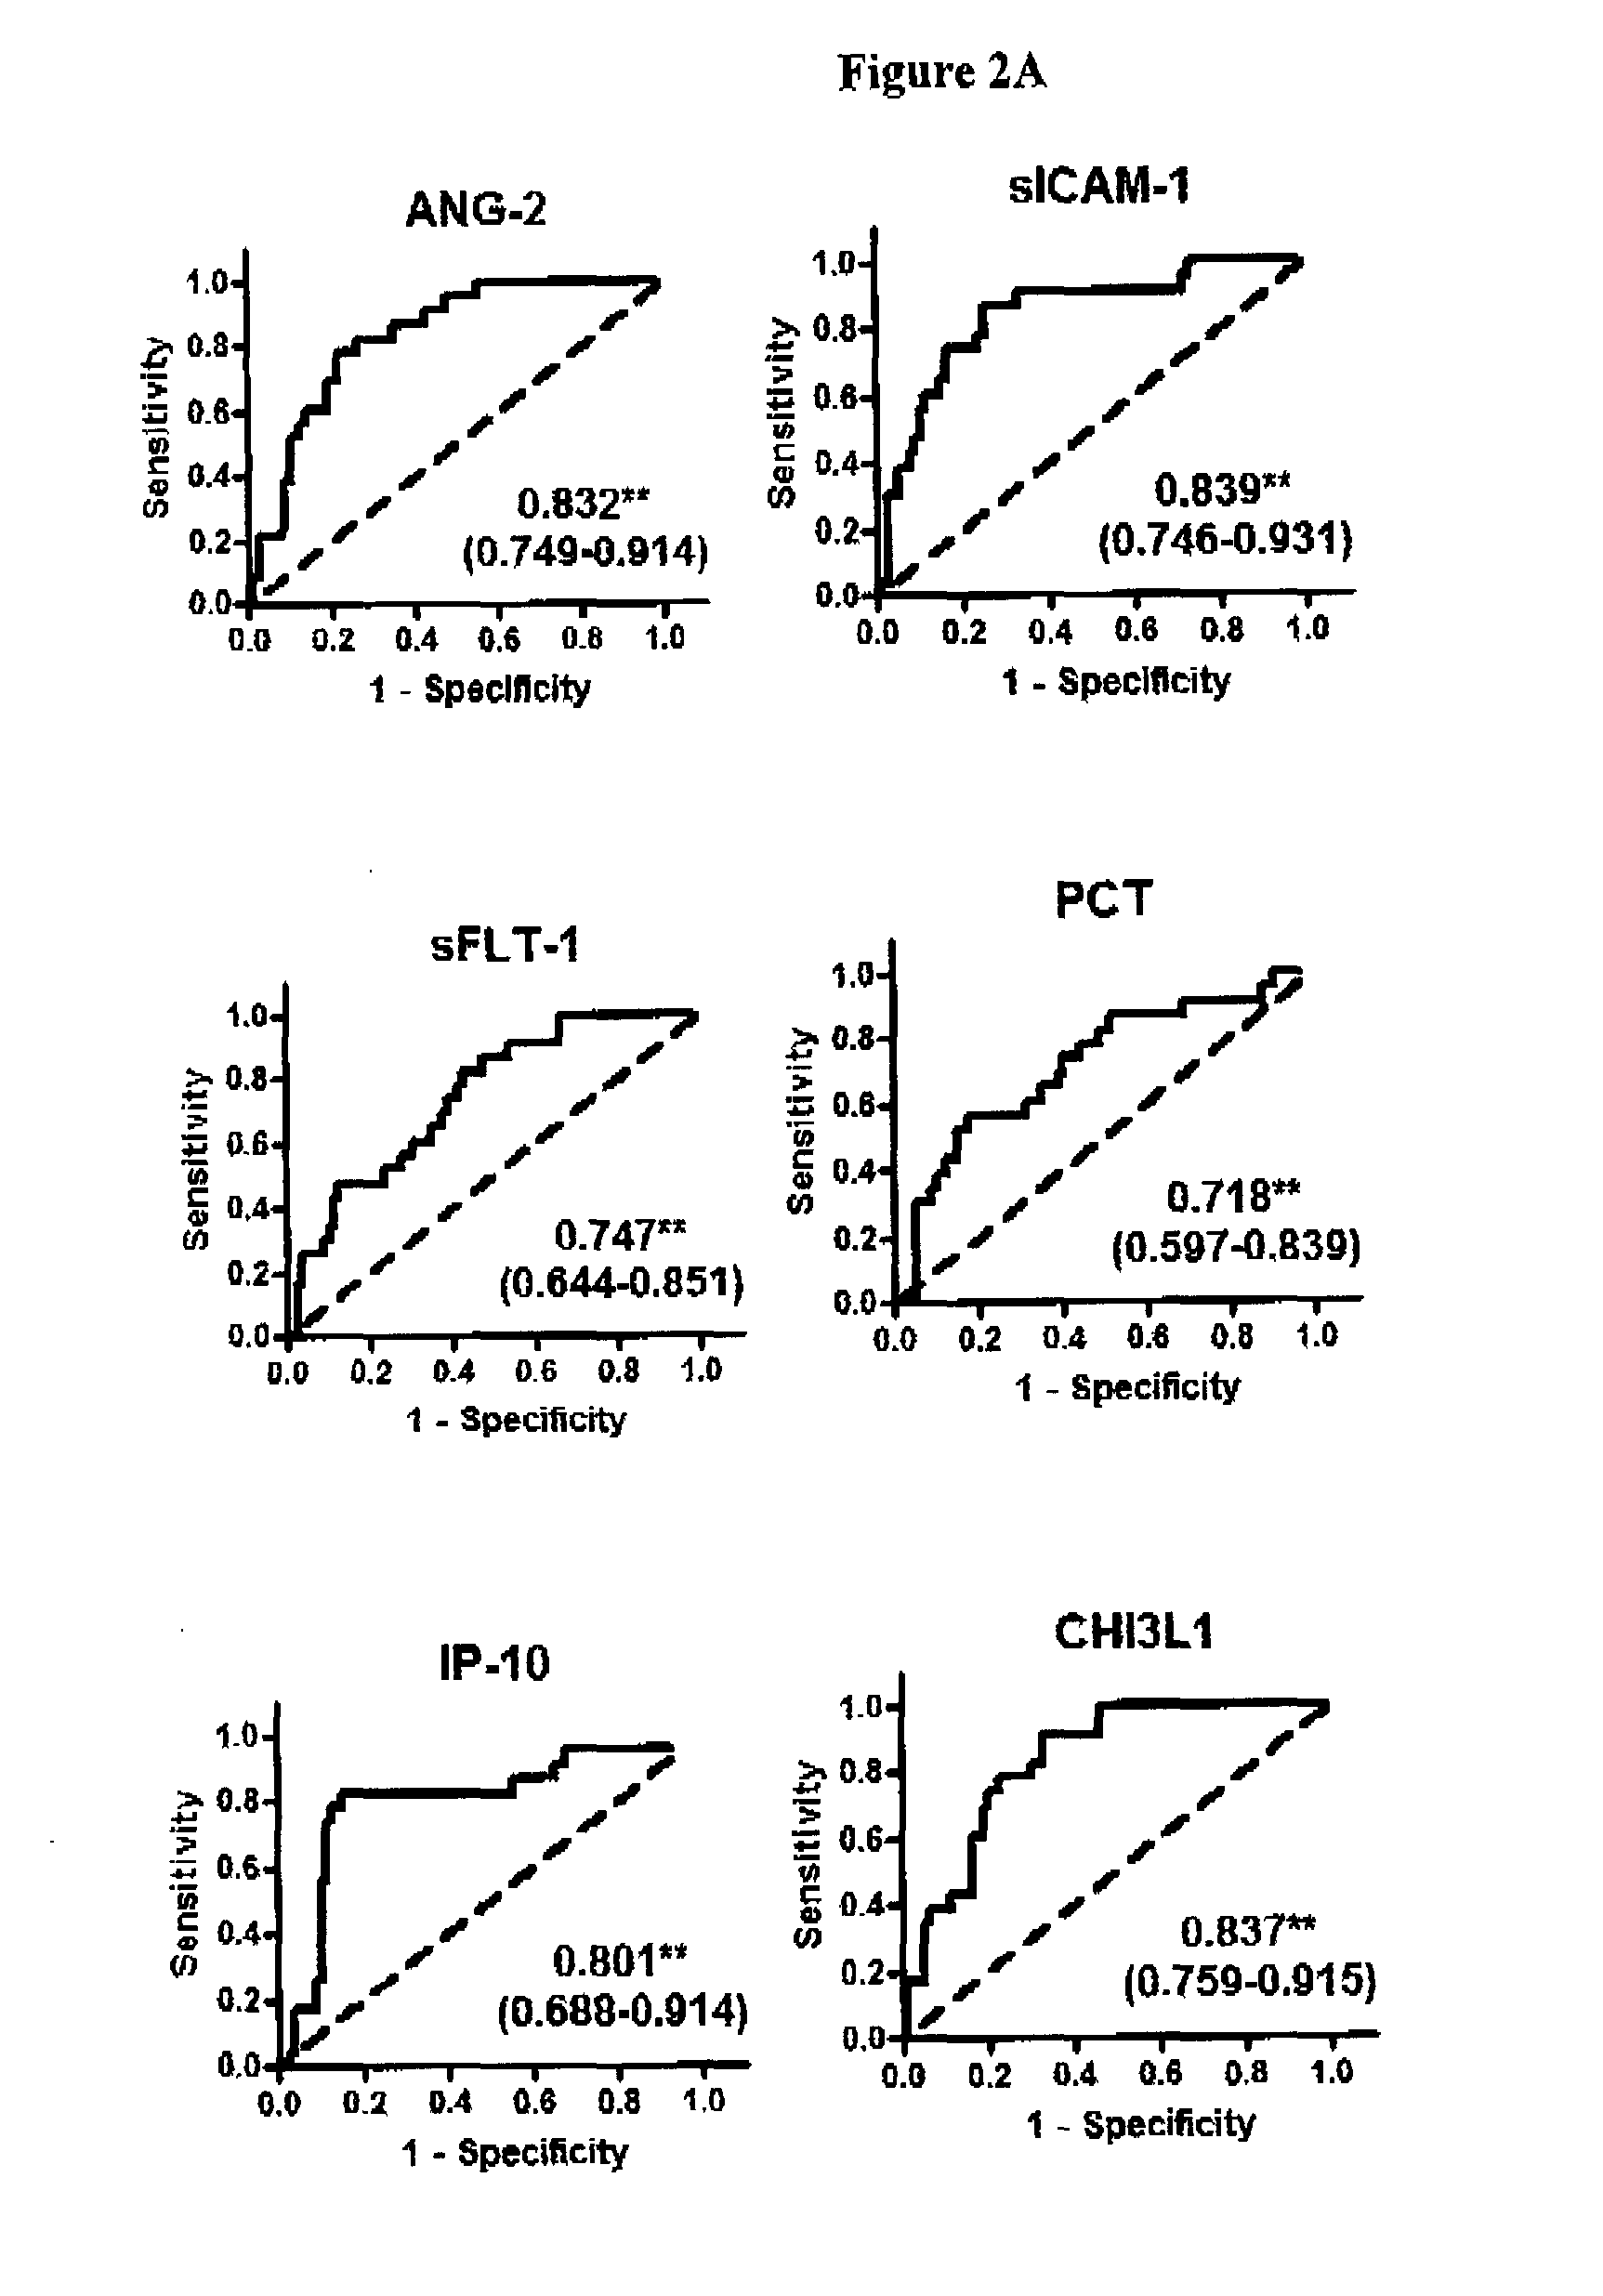 Biomarkers for early determination of a critical or life threatening response to illness and/or treatment response